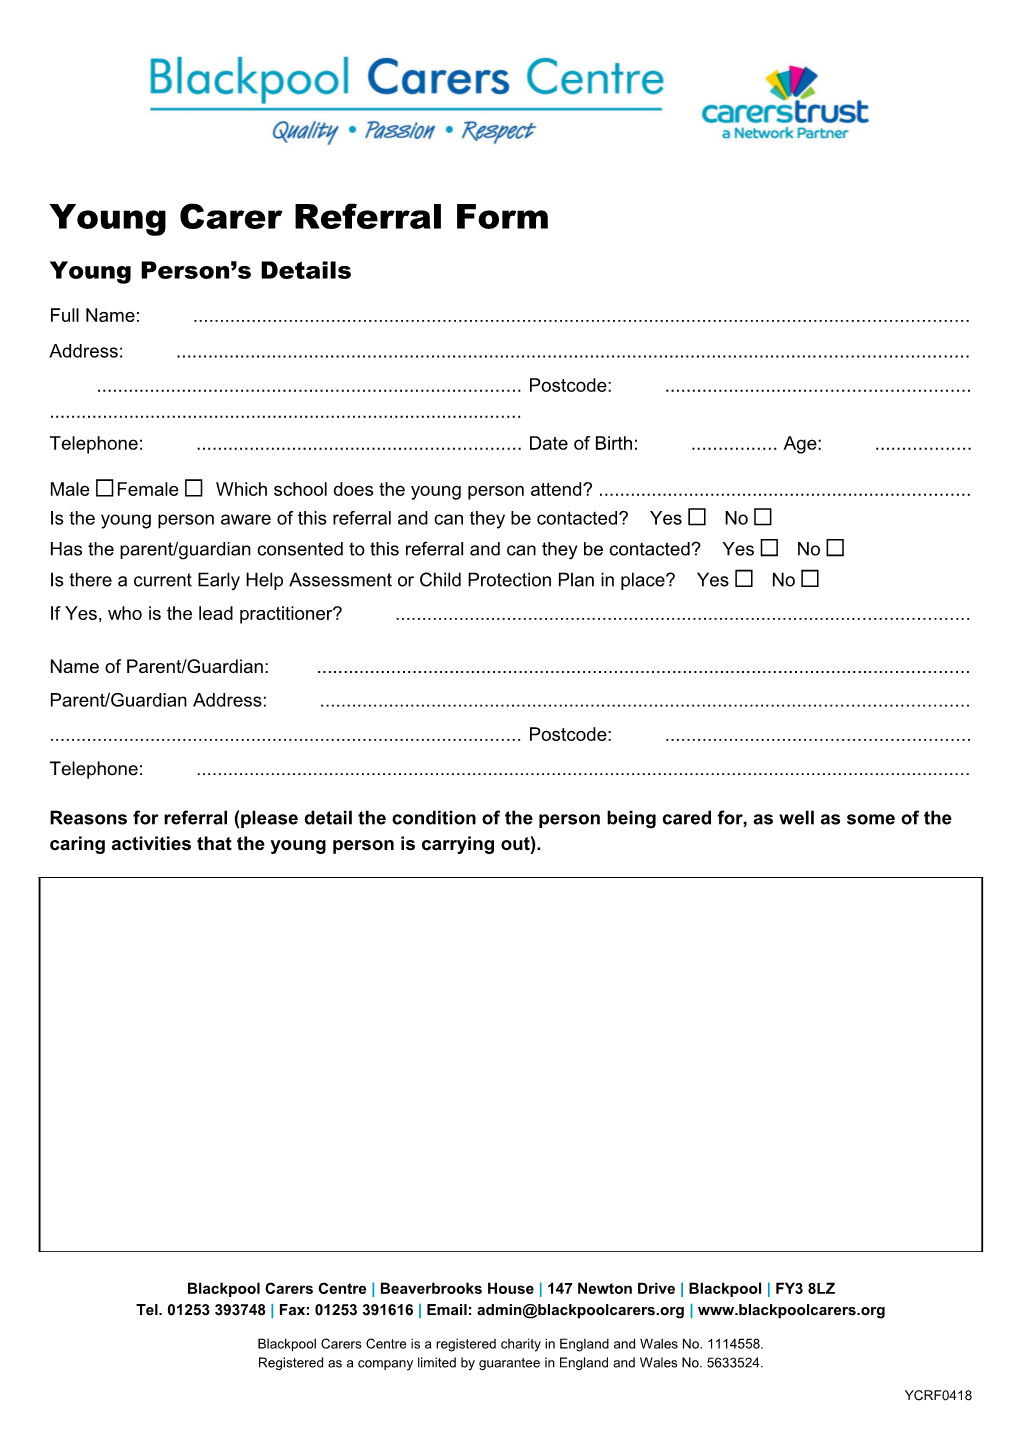 Young Carer Referral Form